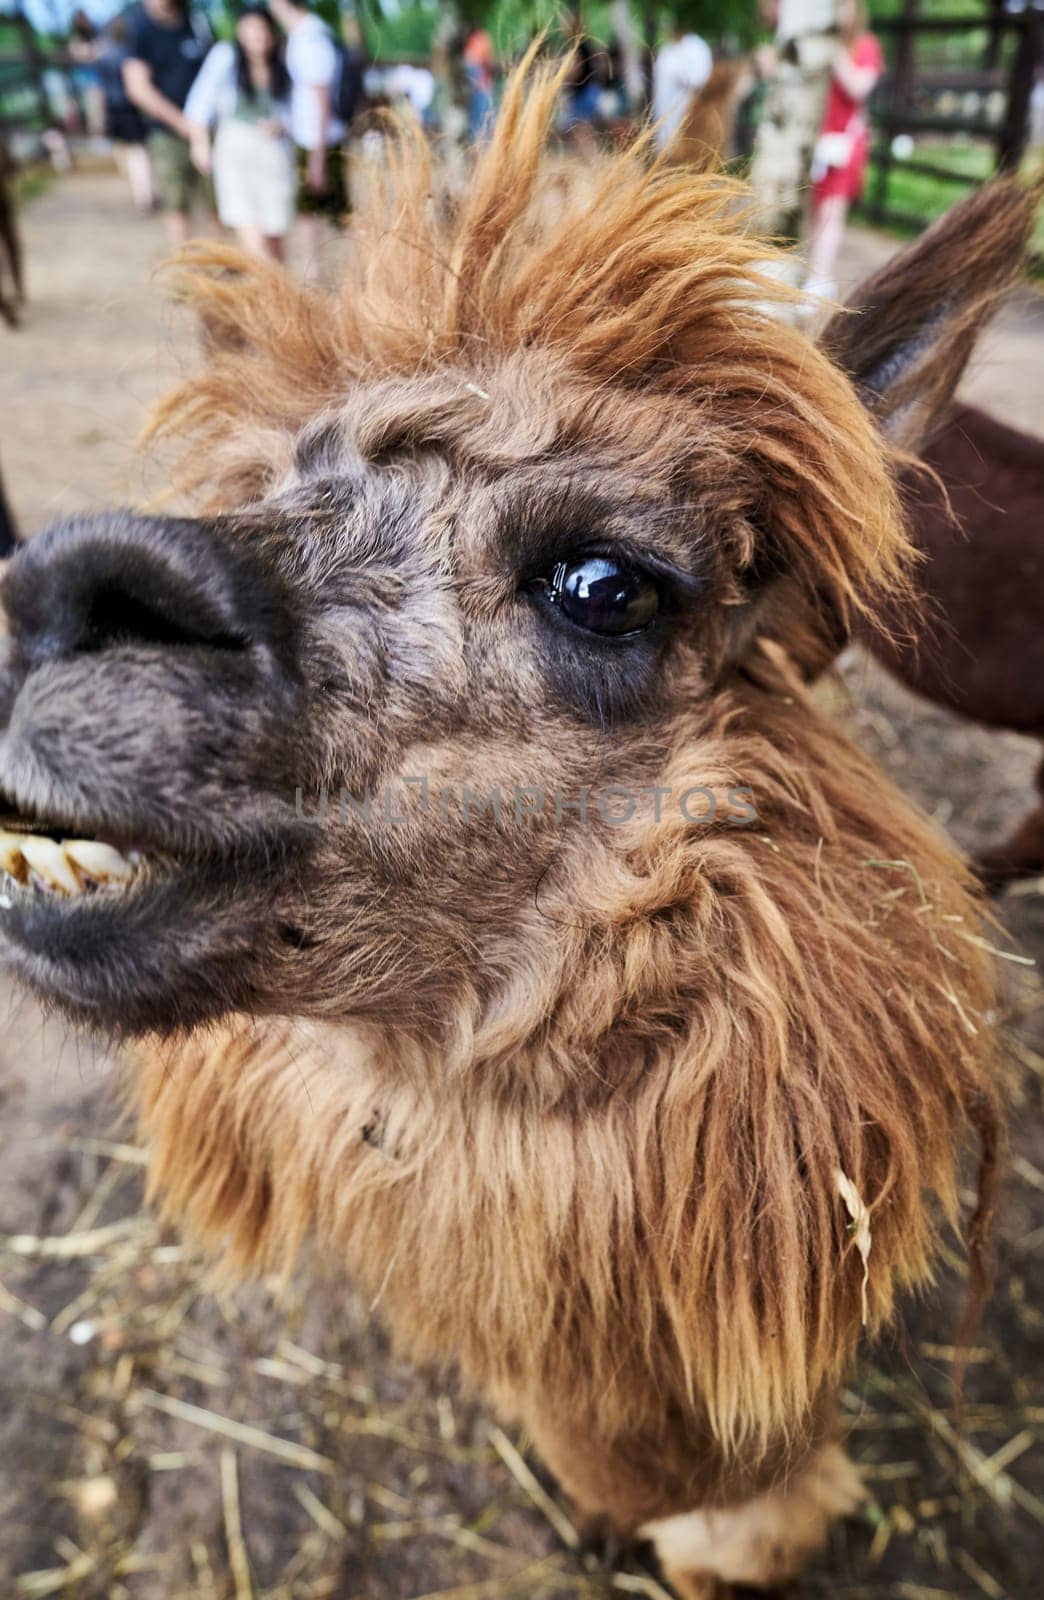 Funny hairy brown alpaca at the farm close-up portrait by driver-s